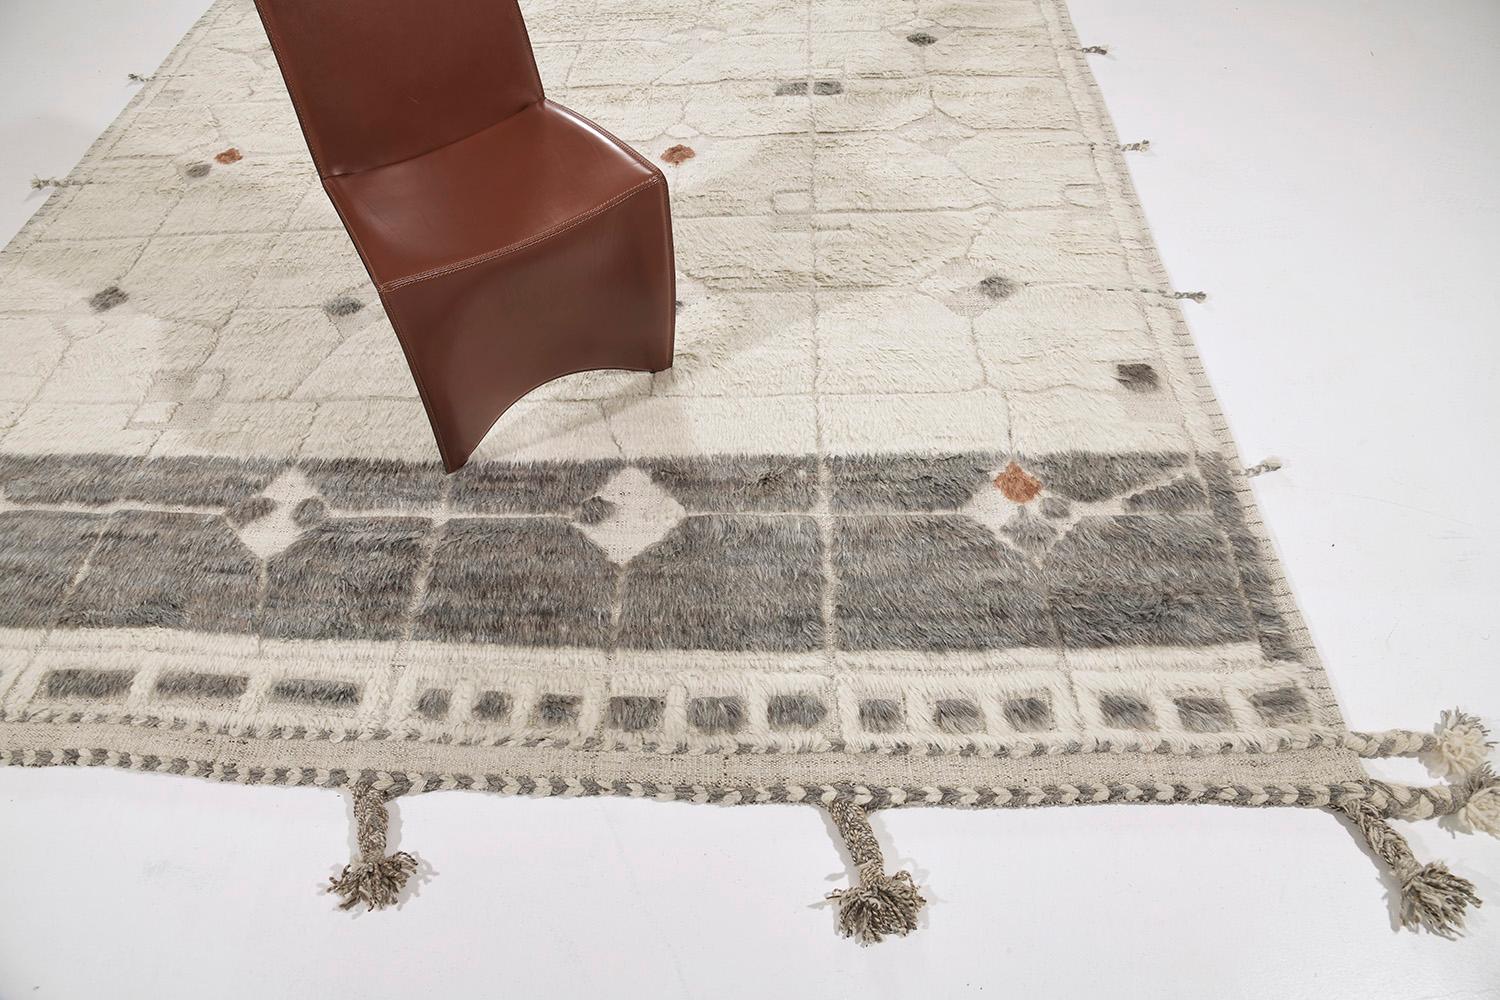 Pirouette is a mesmerizing rug that features a stunning natural color scheme displaying an array of wonderful symbolical motifs. Natural and gray play an integral part in illuminating the rug’s overall majestic appearance. This collection, 'Kust'